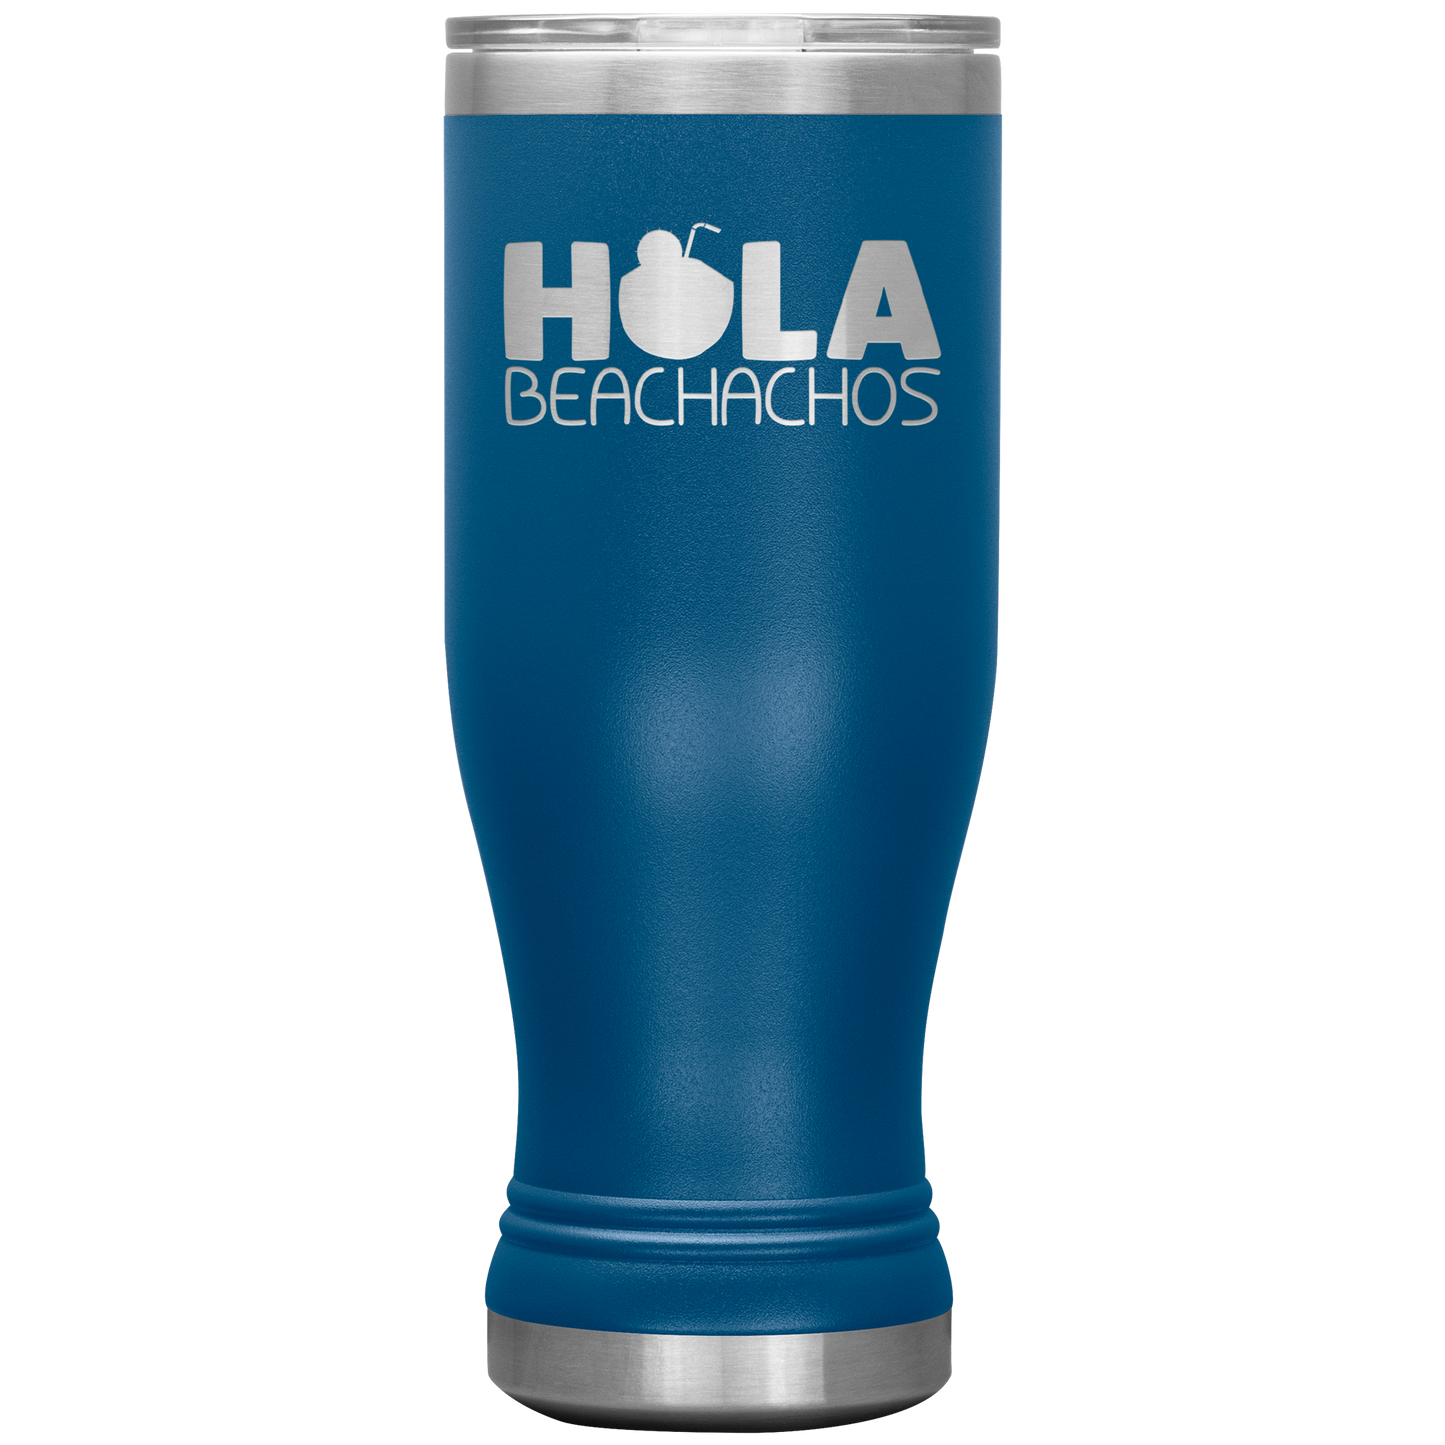 Hola Beachachos Funny Tumbler Cup Mug Summer Coffee Stainless Steel Tumbler Cups